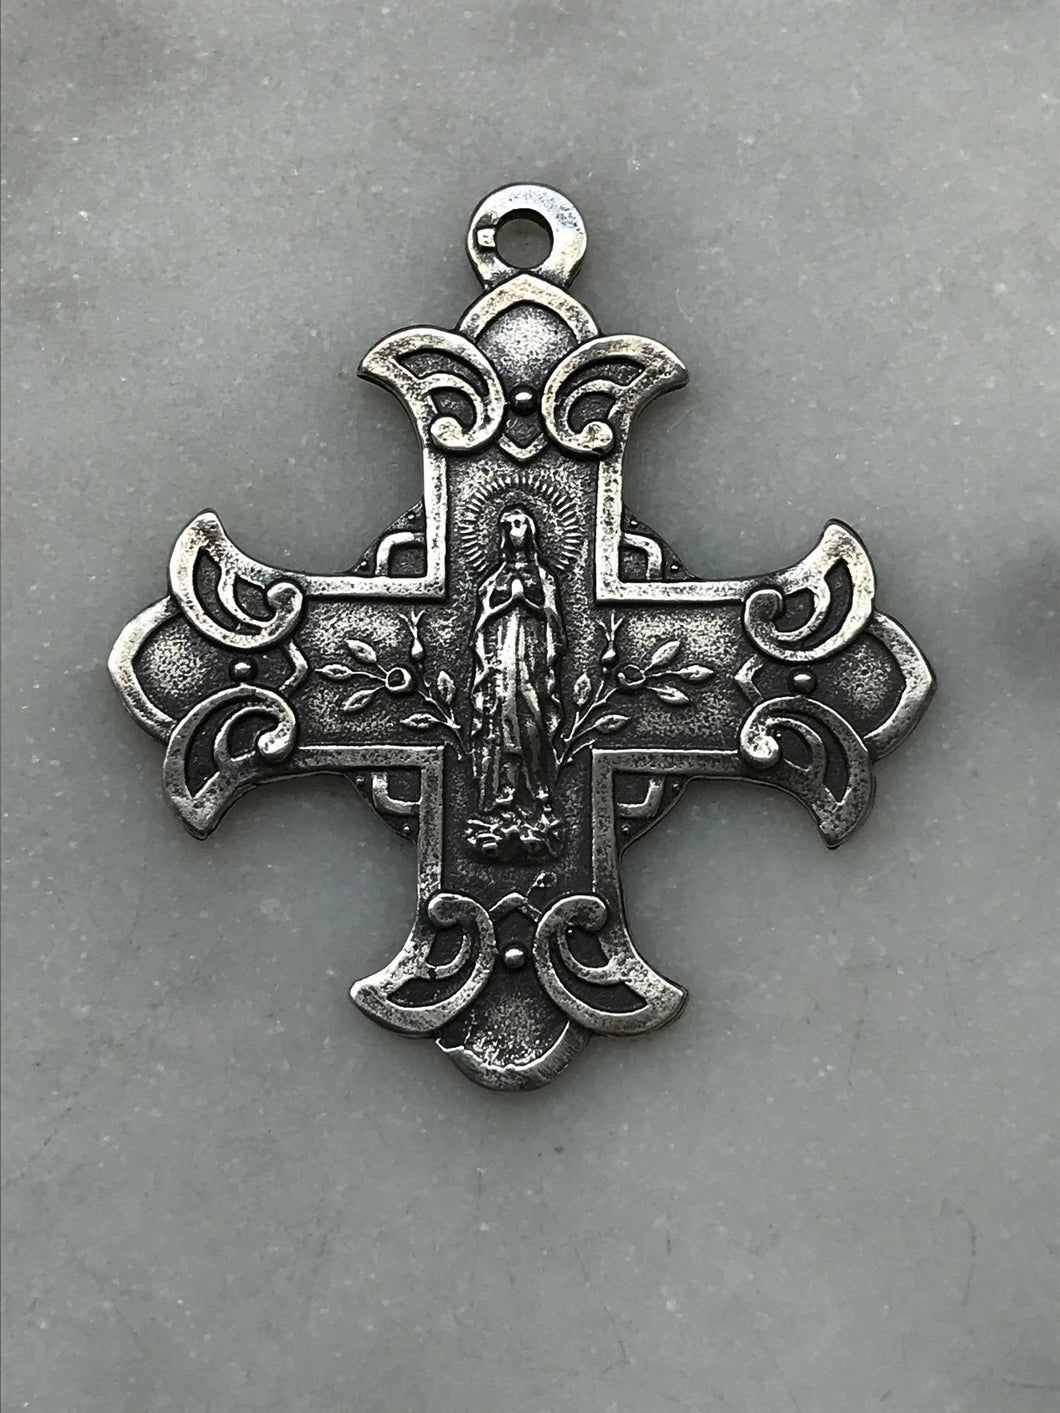 Sacred Heart/Blessed Virgin Mary Medal -cross- Bronze or Sterling Silver - Antique Reproduction 053